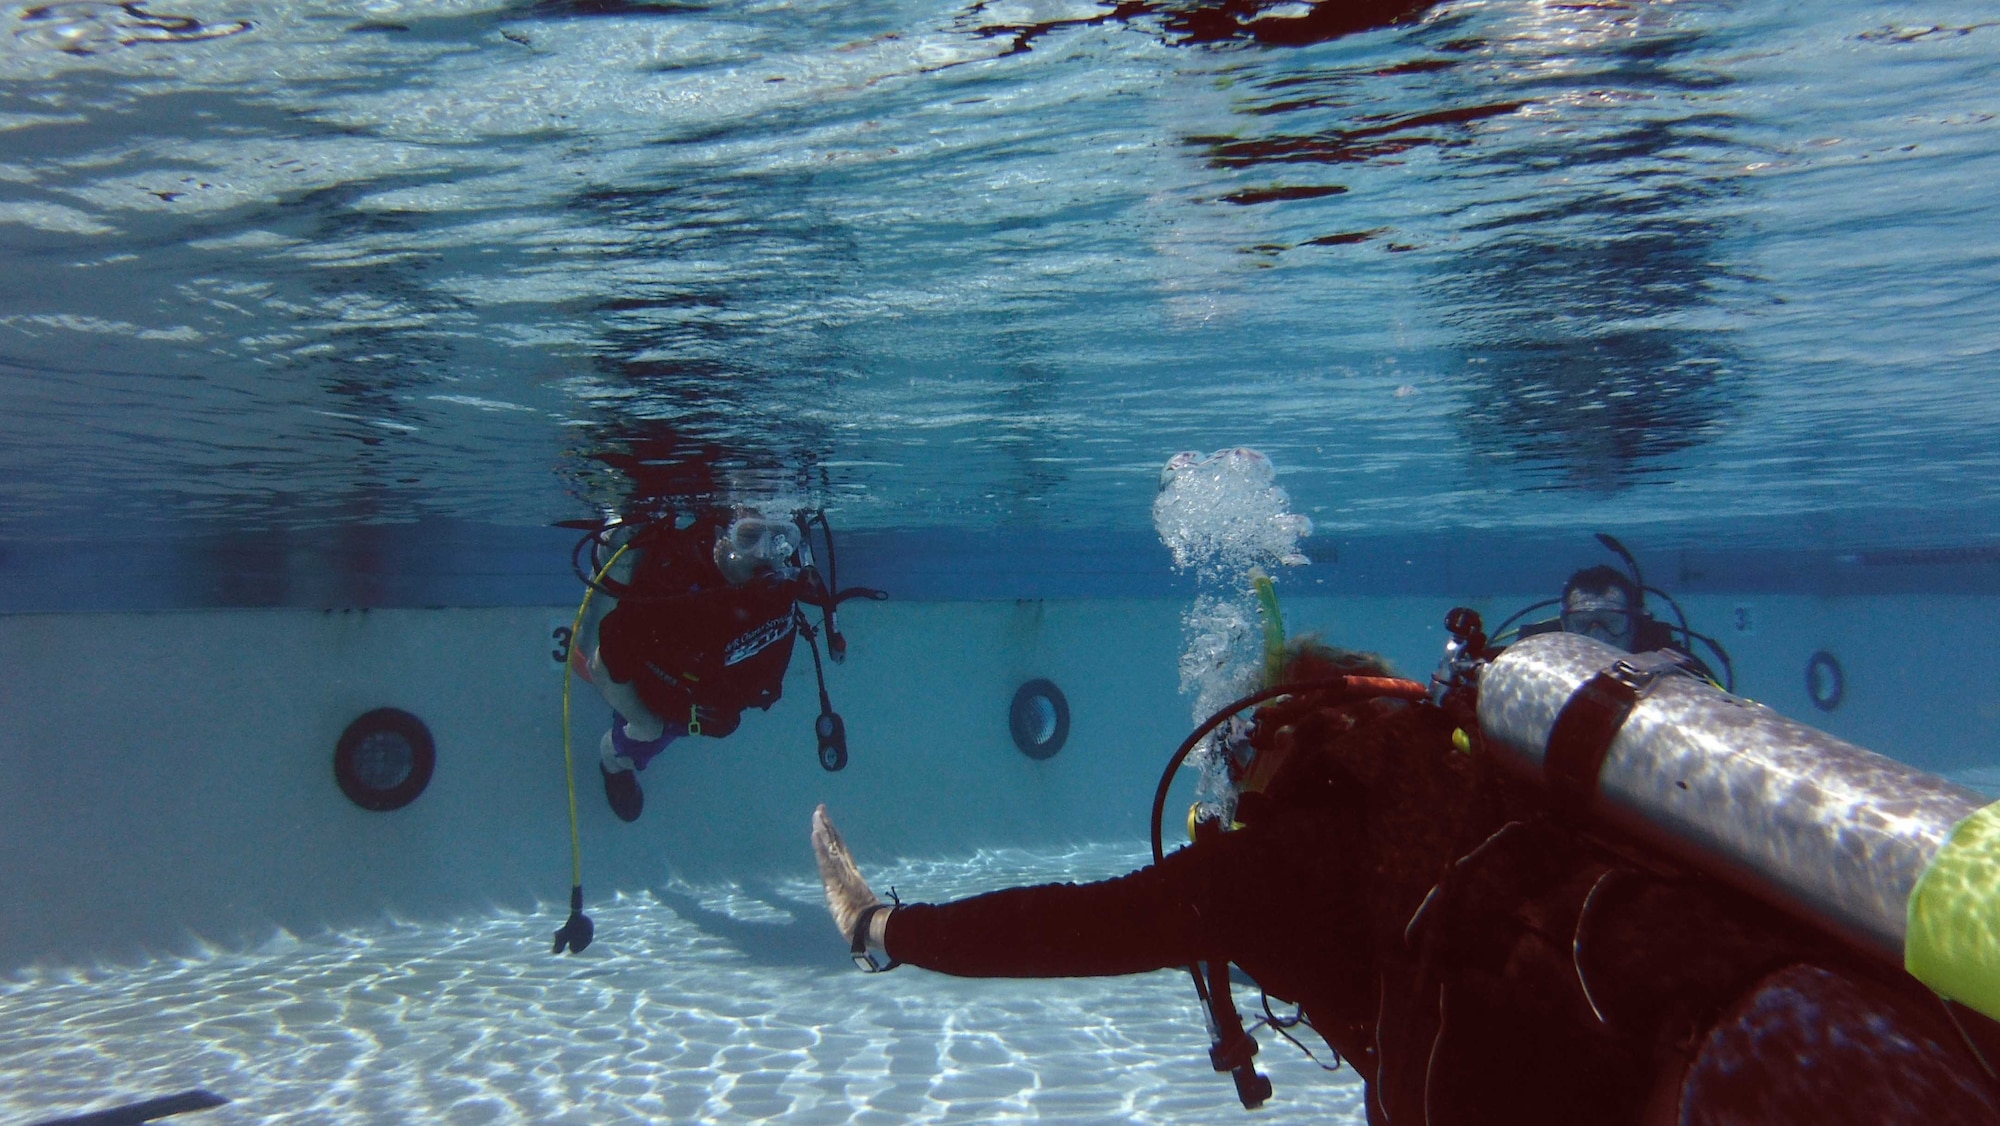 David Jenkins, 36th Force Support Squadron Andersen Family Dive Center instructor, teaches basic scuba skills in the pool at Andersen Air Force Base, Guam, June 22, 2013. The Family Dive Center offers four main certification classes and 10 specialty courses. Anyone ages 8 and up can learn to dive. (U.S. Air Force photo by Staff Sgt. Veronica Montes/Released)